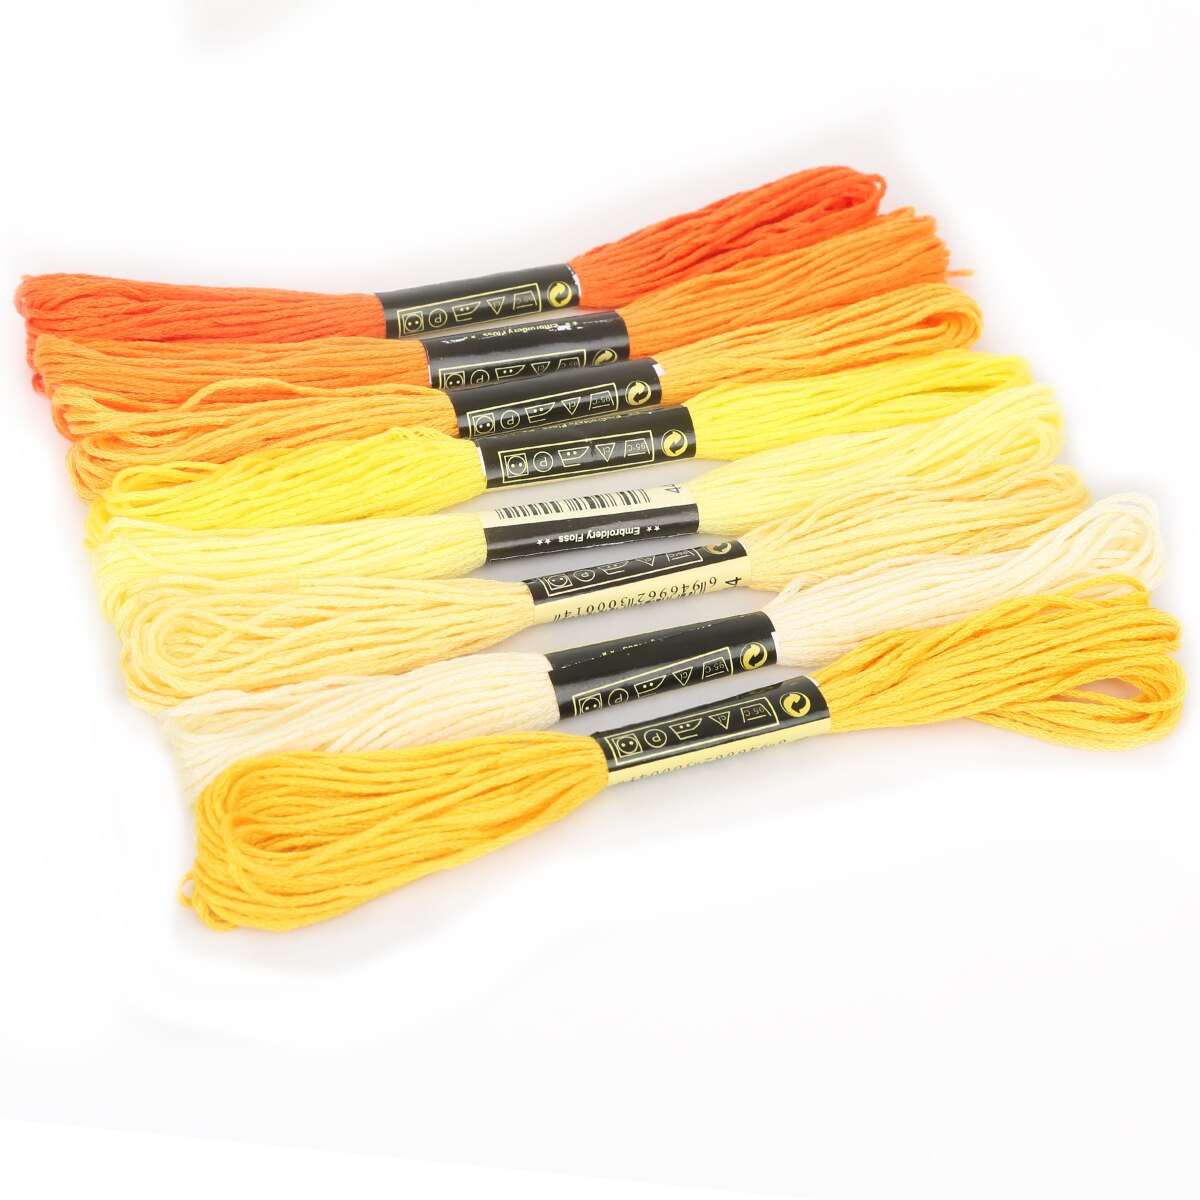 8pcs 7.5m Multiple Color Thread Cross Stitch Cotton Sewing Skeins Craft Embroidery Thread Floss Kit DIY Sewing Tools Accessories: Yellow